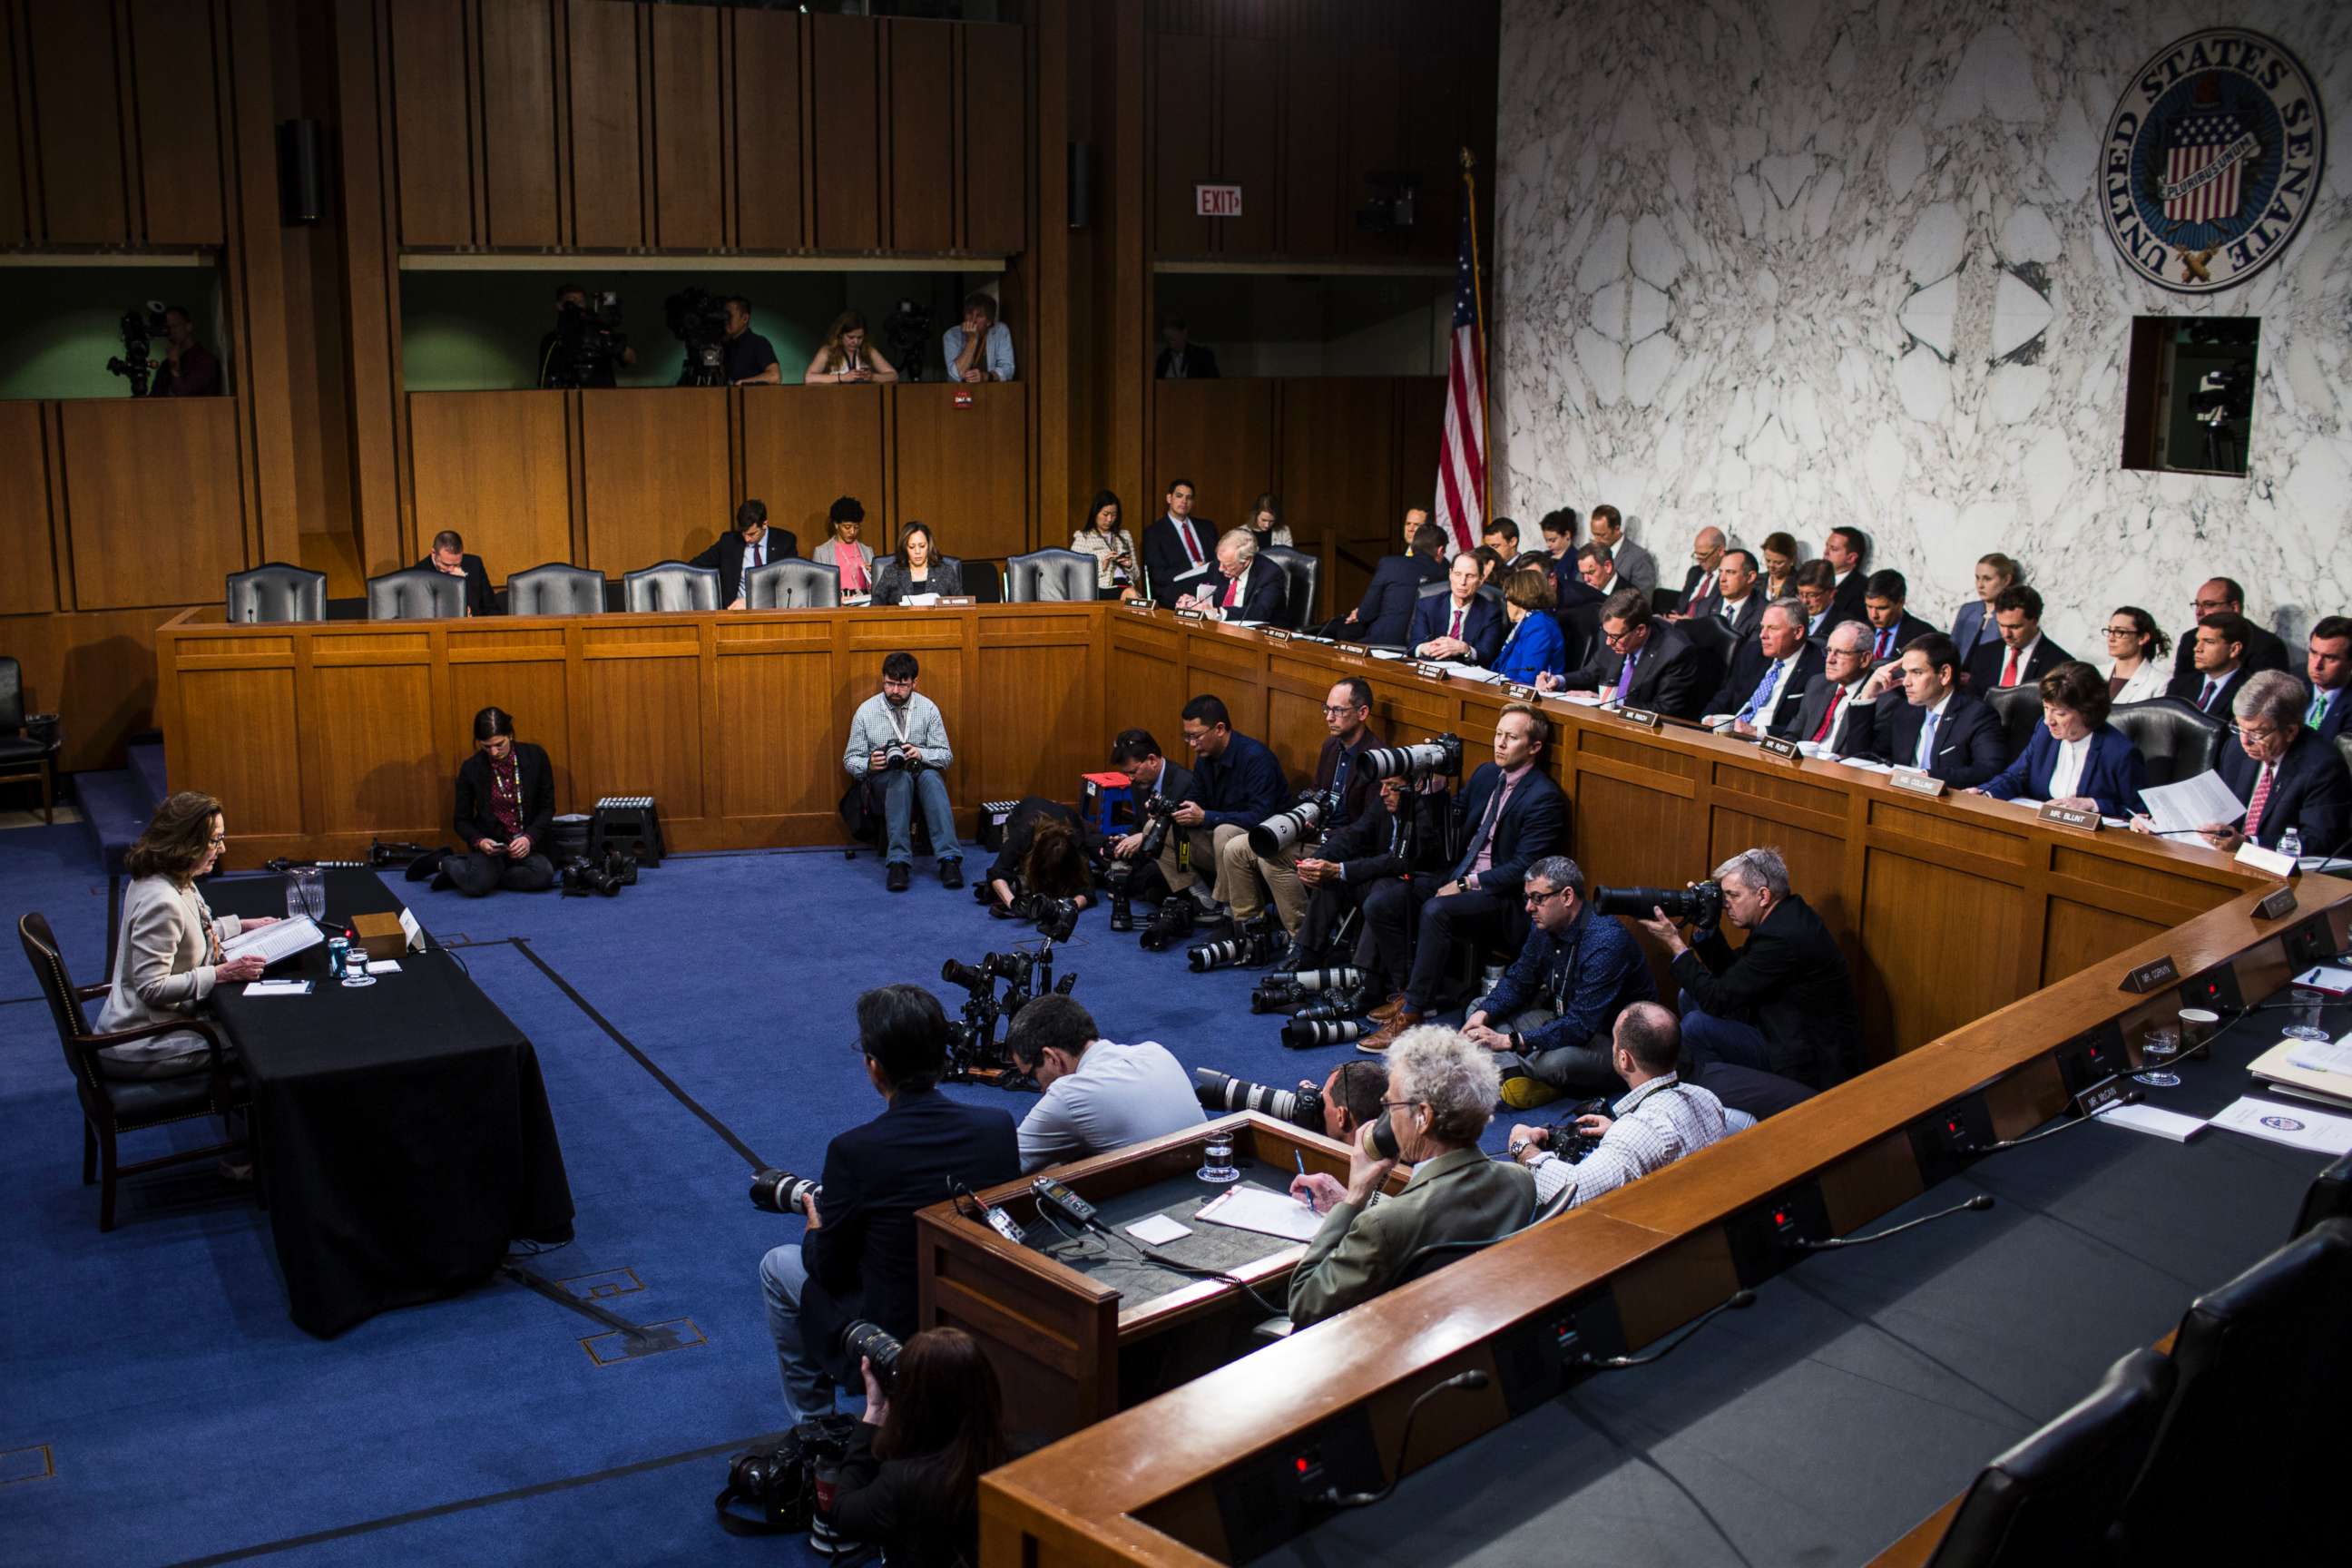 PHOTO: Members of the the Senate (Select) Committee on Intelligence listening to CIA Director nominee, Gina Haspel,  May 9, 2018 in Washington, DC.